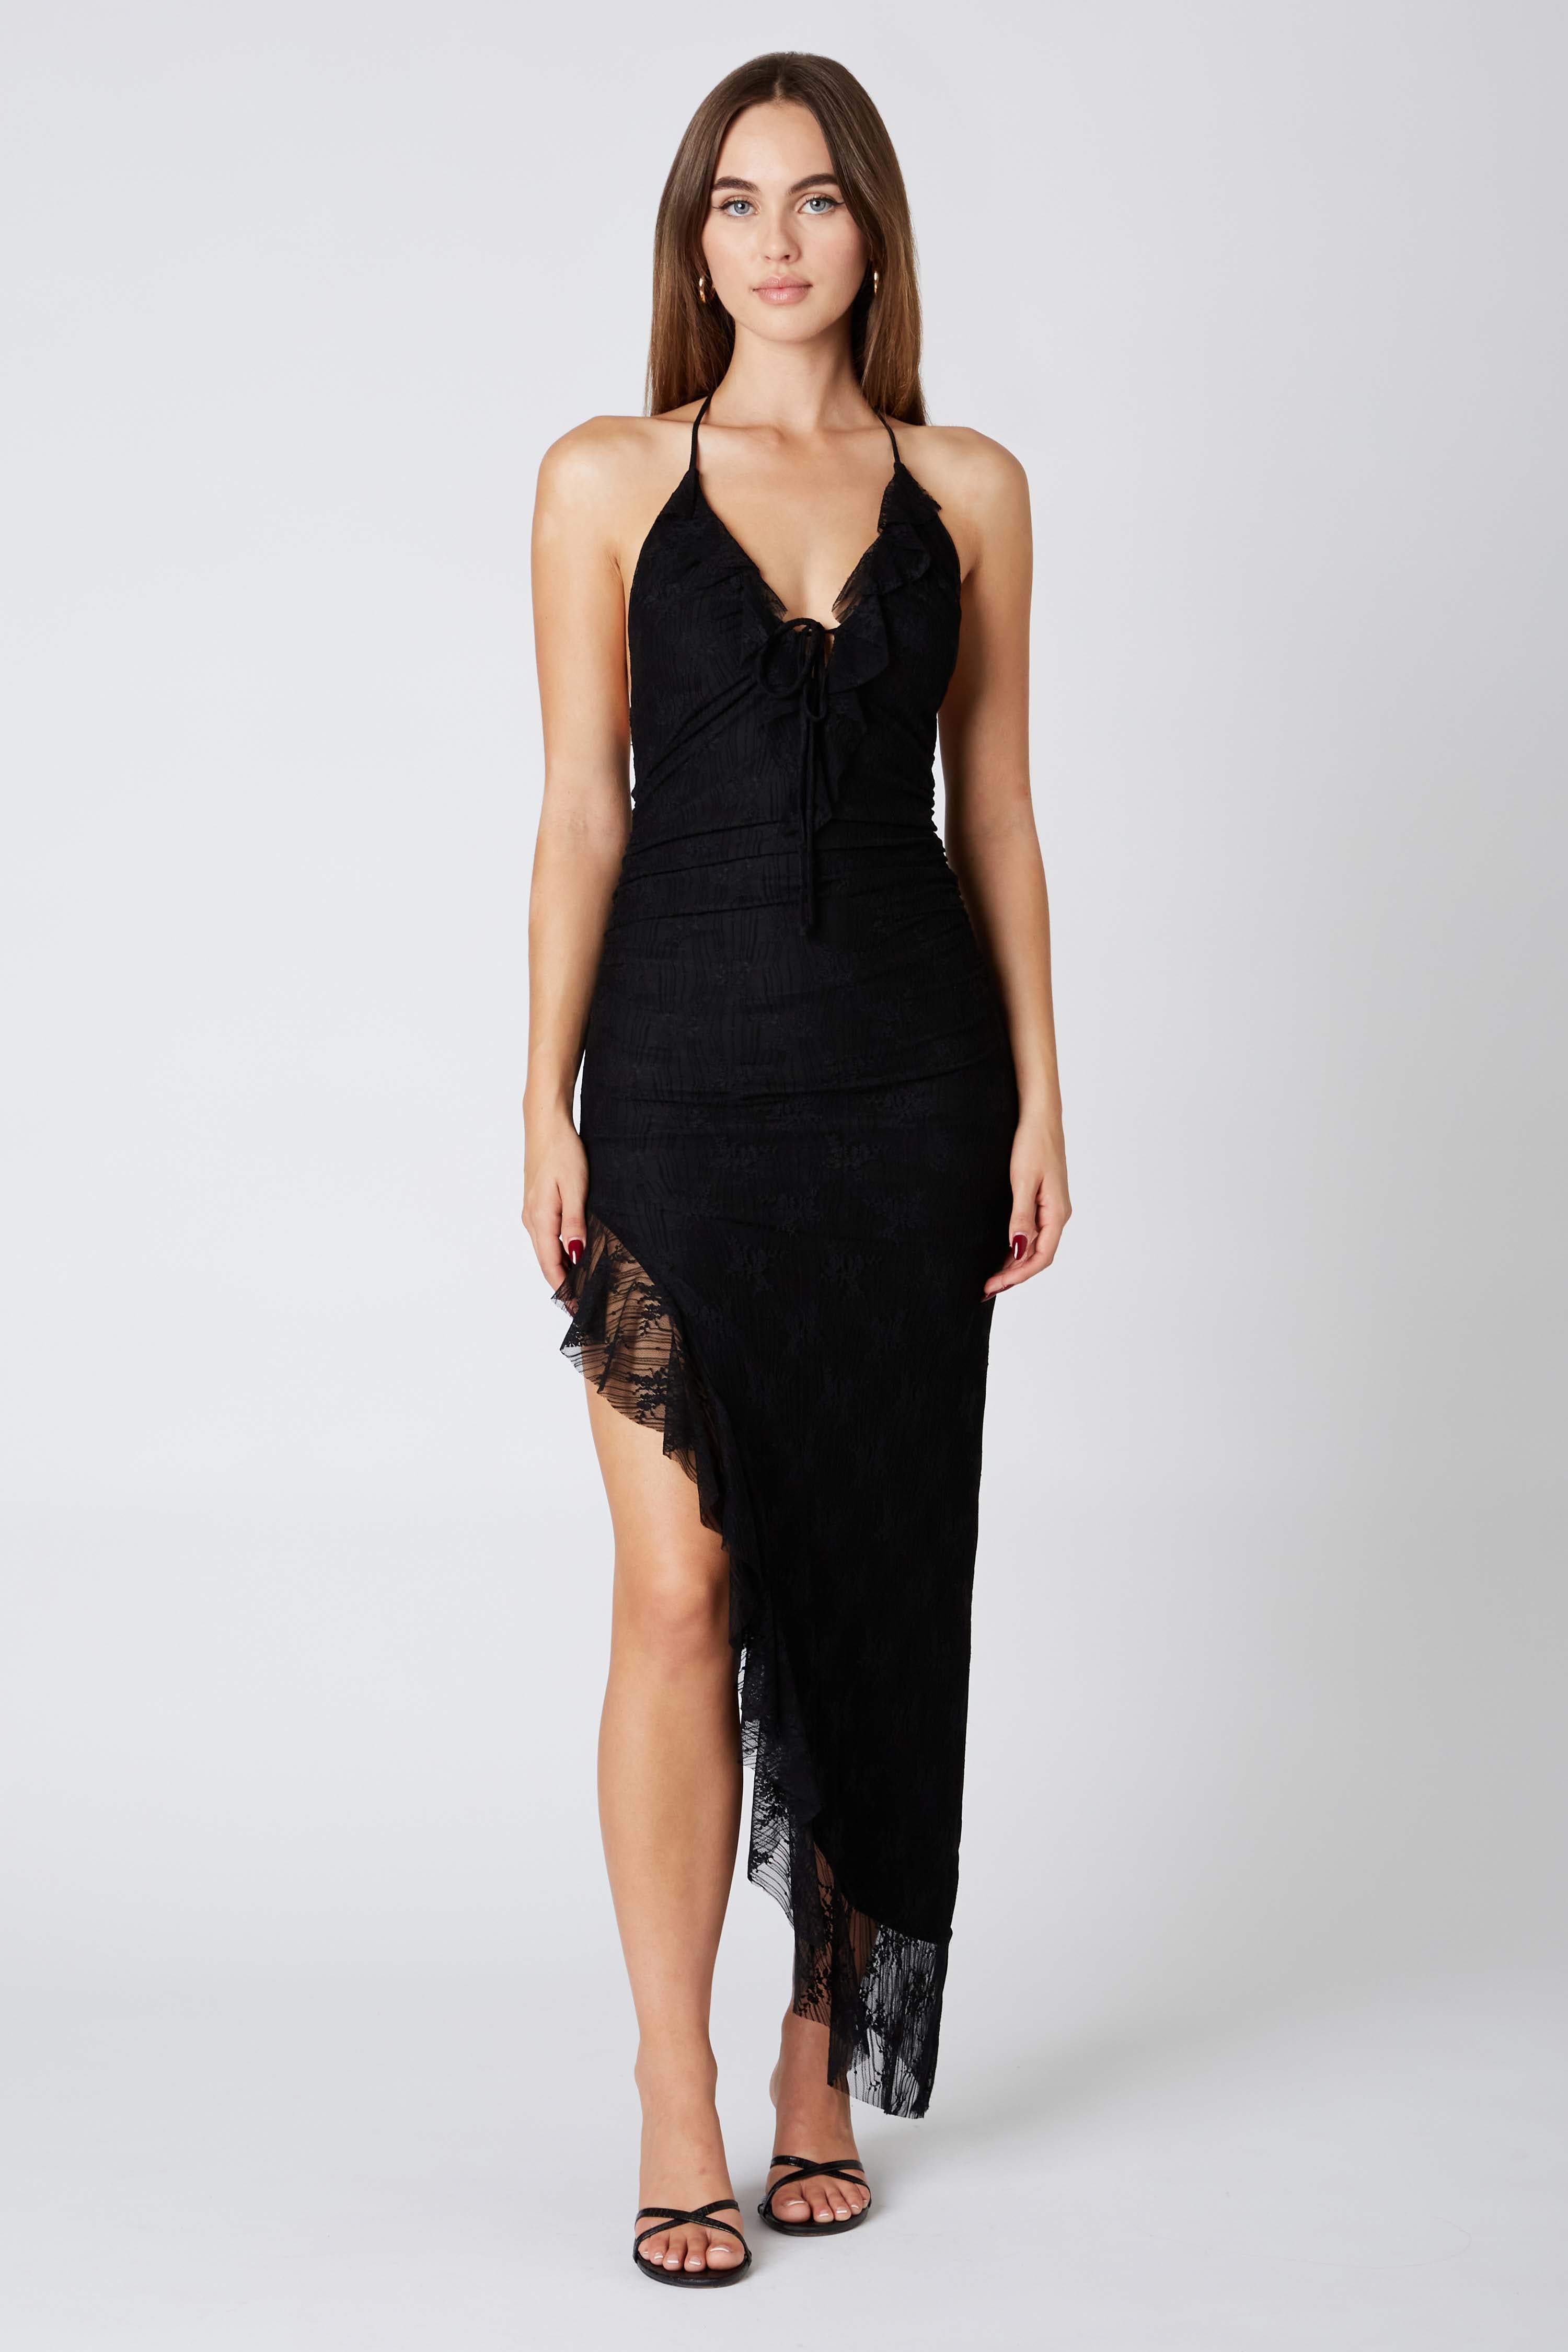 Lace Halter Asymmetrical Midi Dress in Black Front View